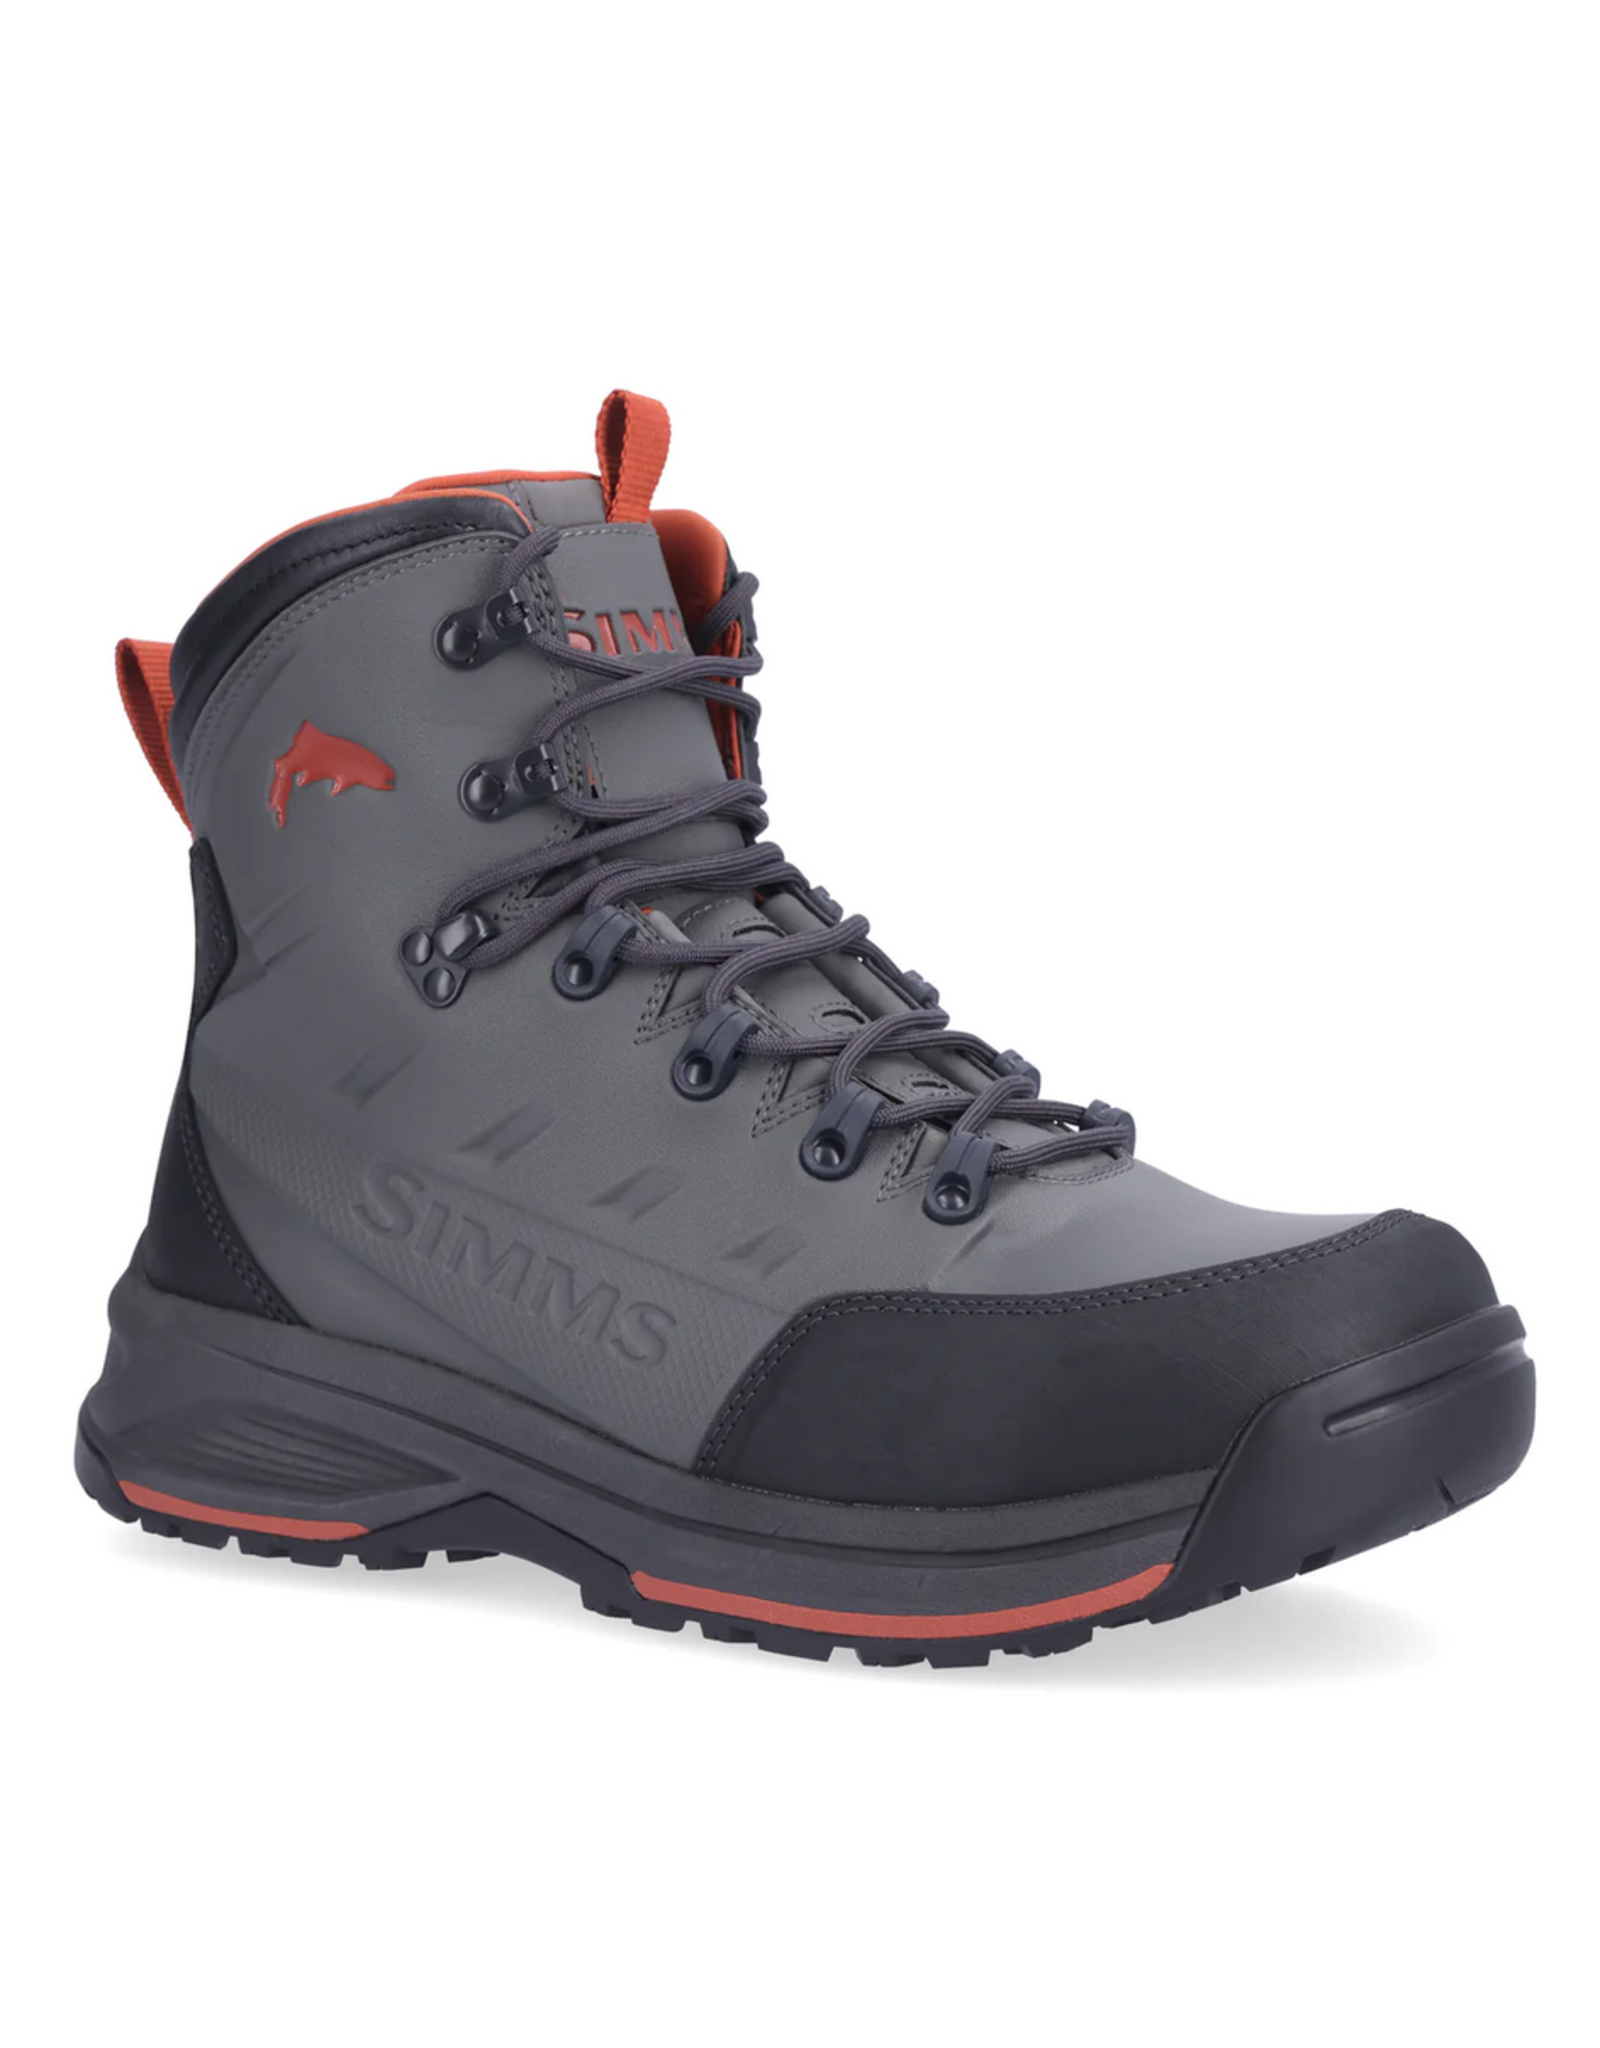 Simms NEW Simms Men's Freestone Wading Boot - Rubber Sole